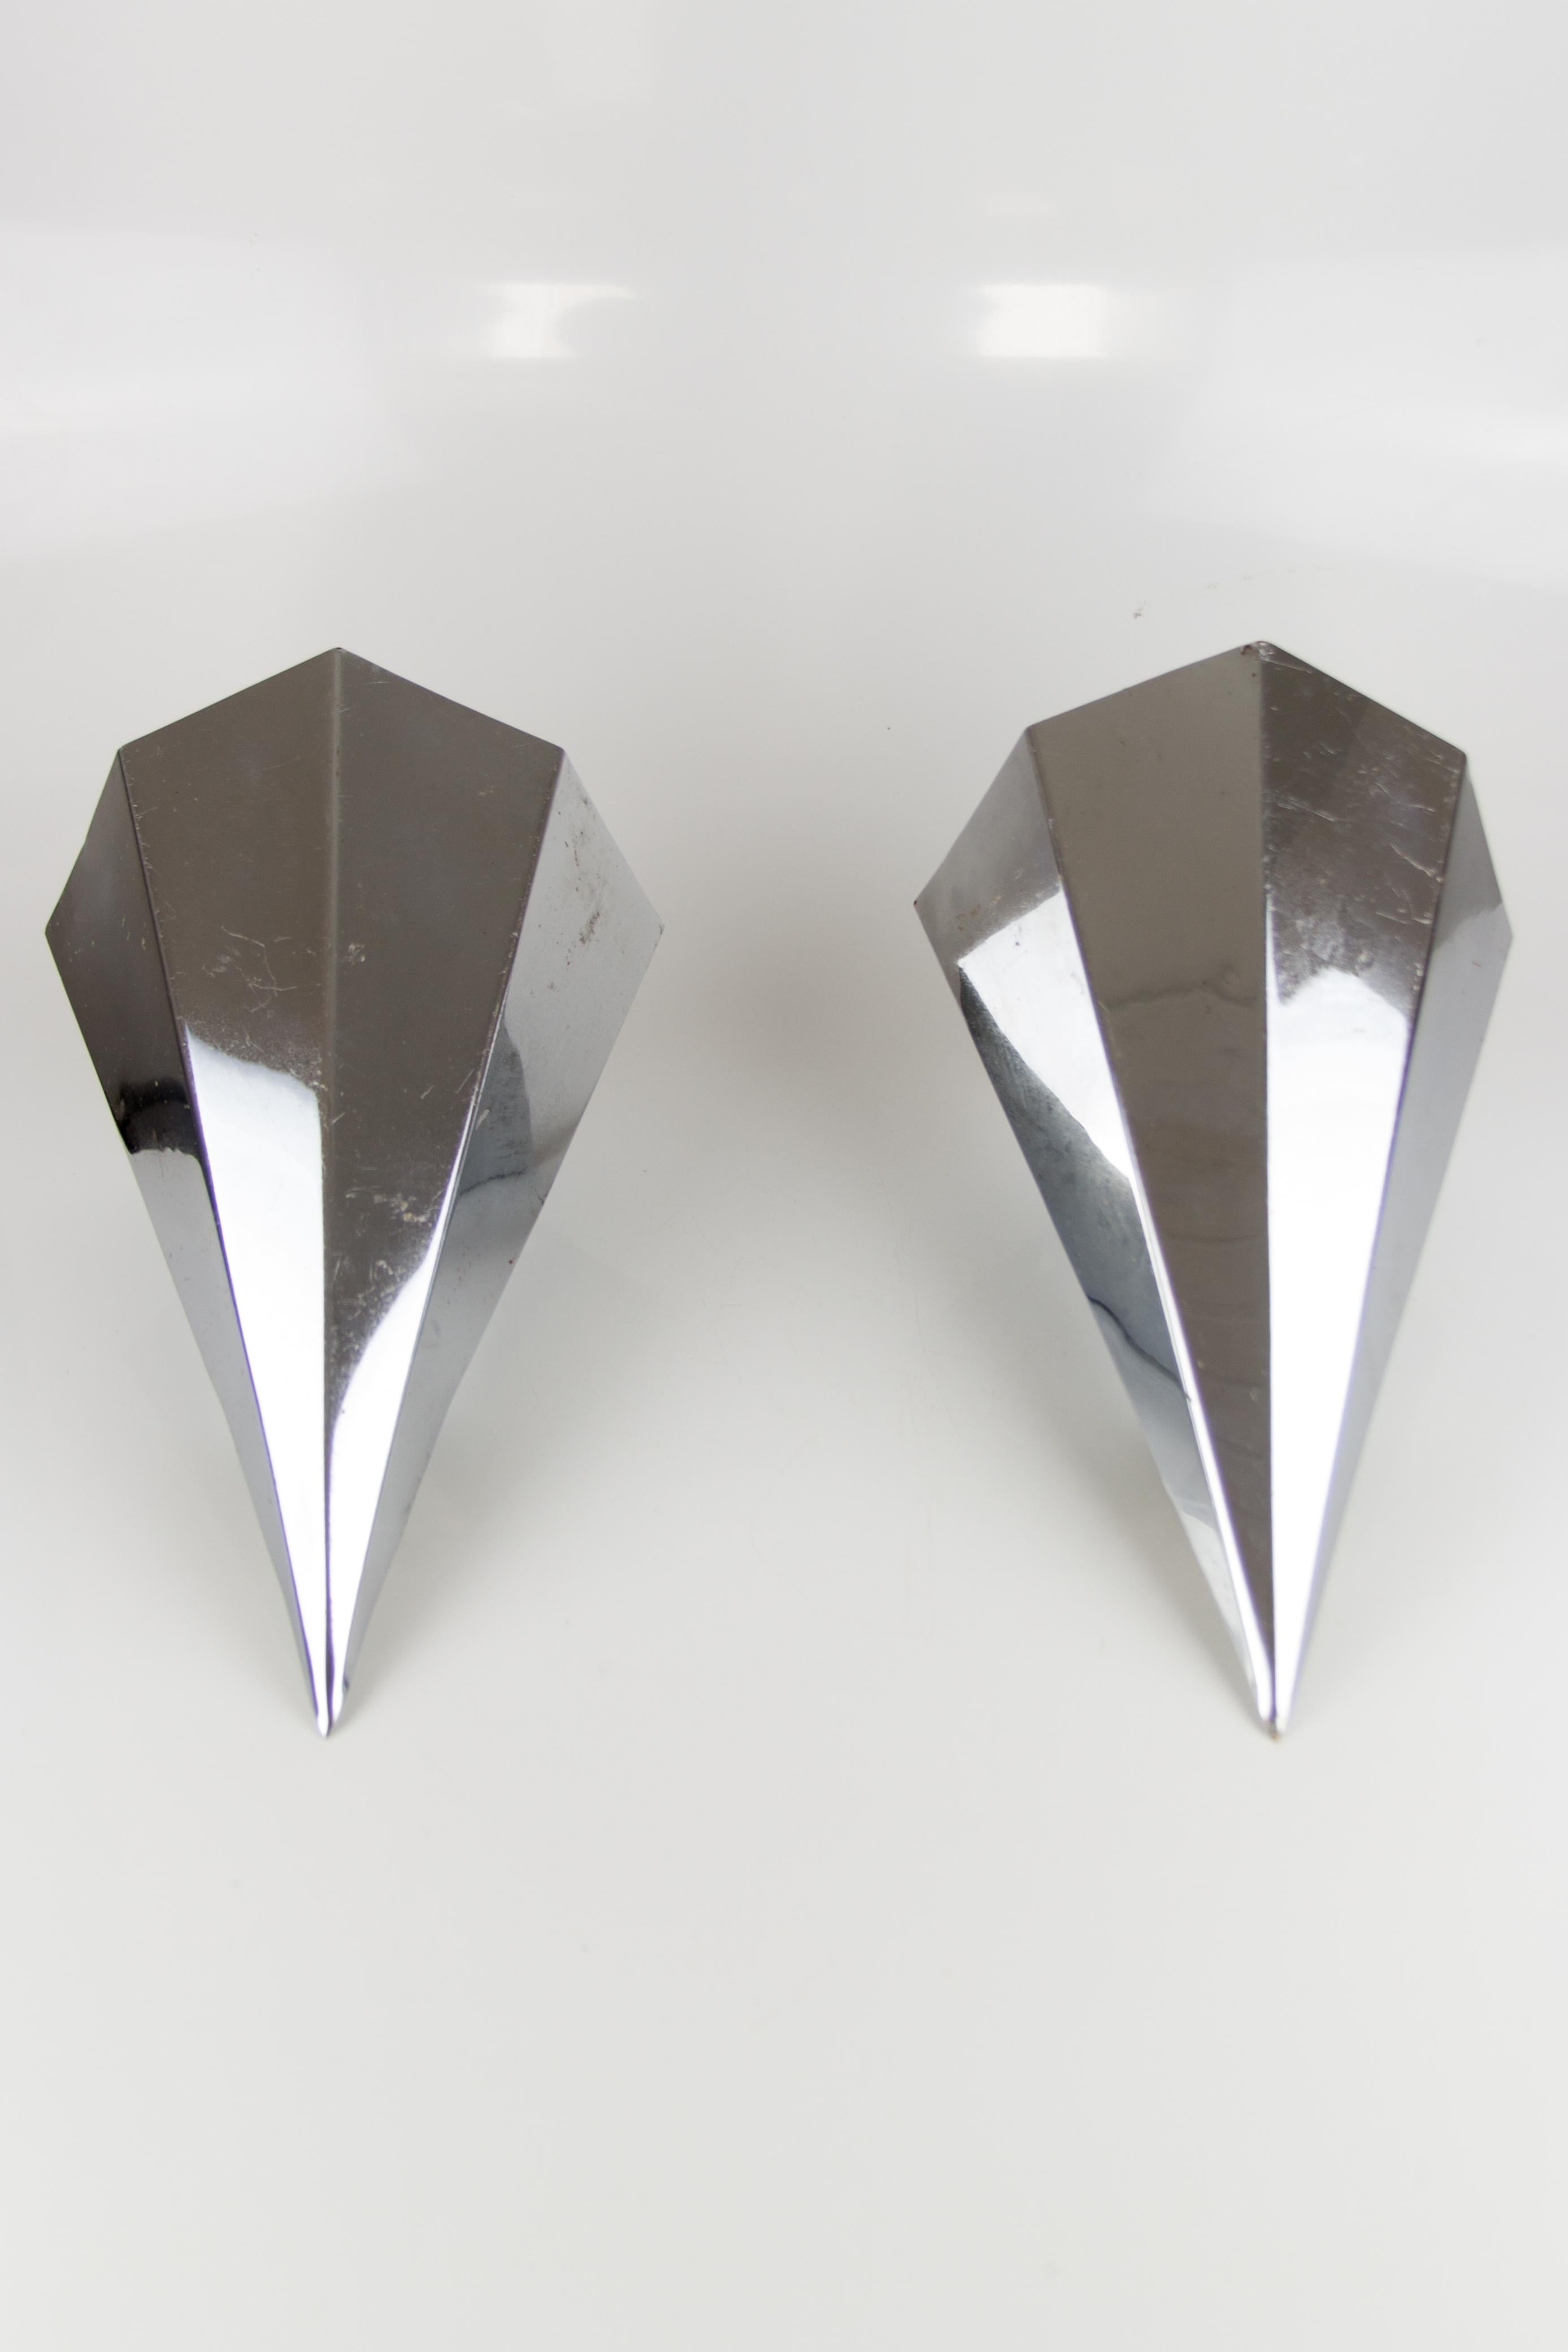 An extraordinary pair of corner wall lights, pentagonal V-shaped sconces. Each with one light, and one socket for a B22 size light bulb.
These corner wall lights are ideal for the foyer, corridor, or other rooms at home, they reflect an unusual